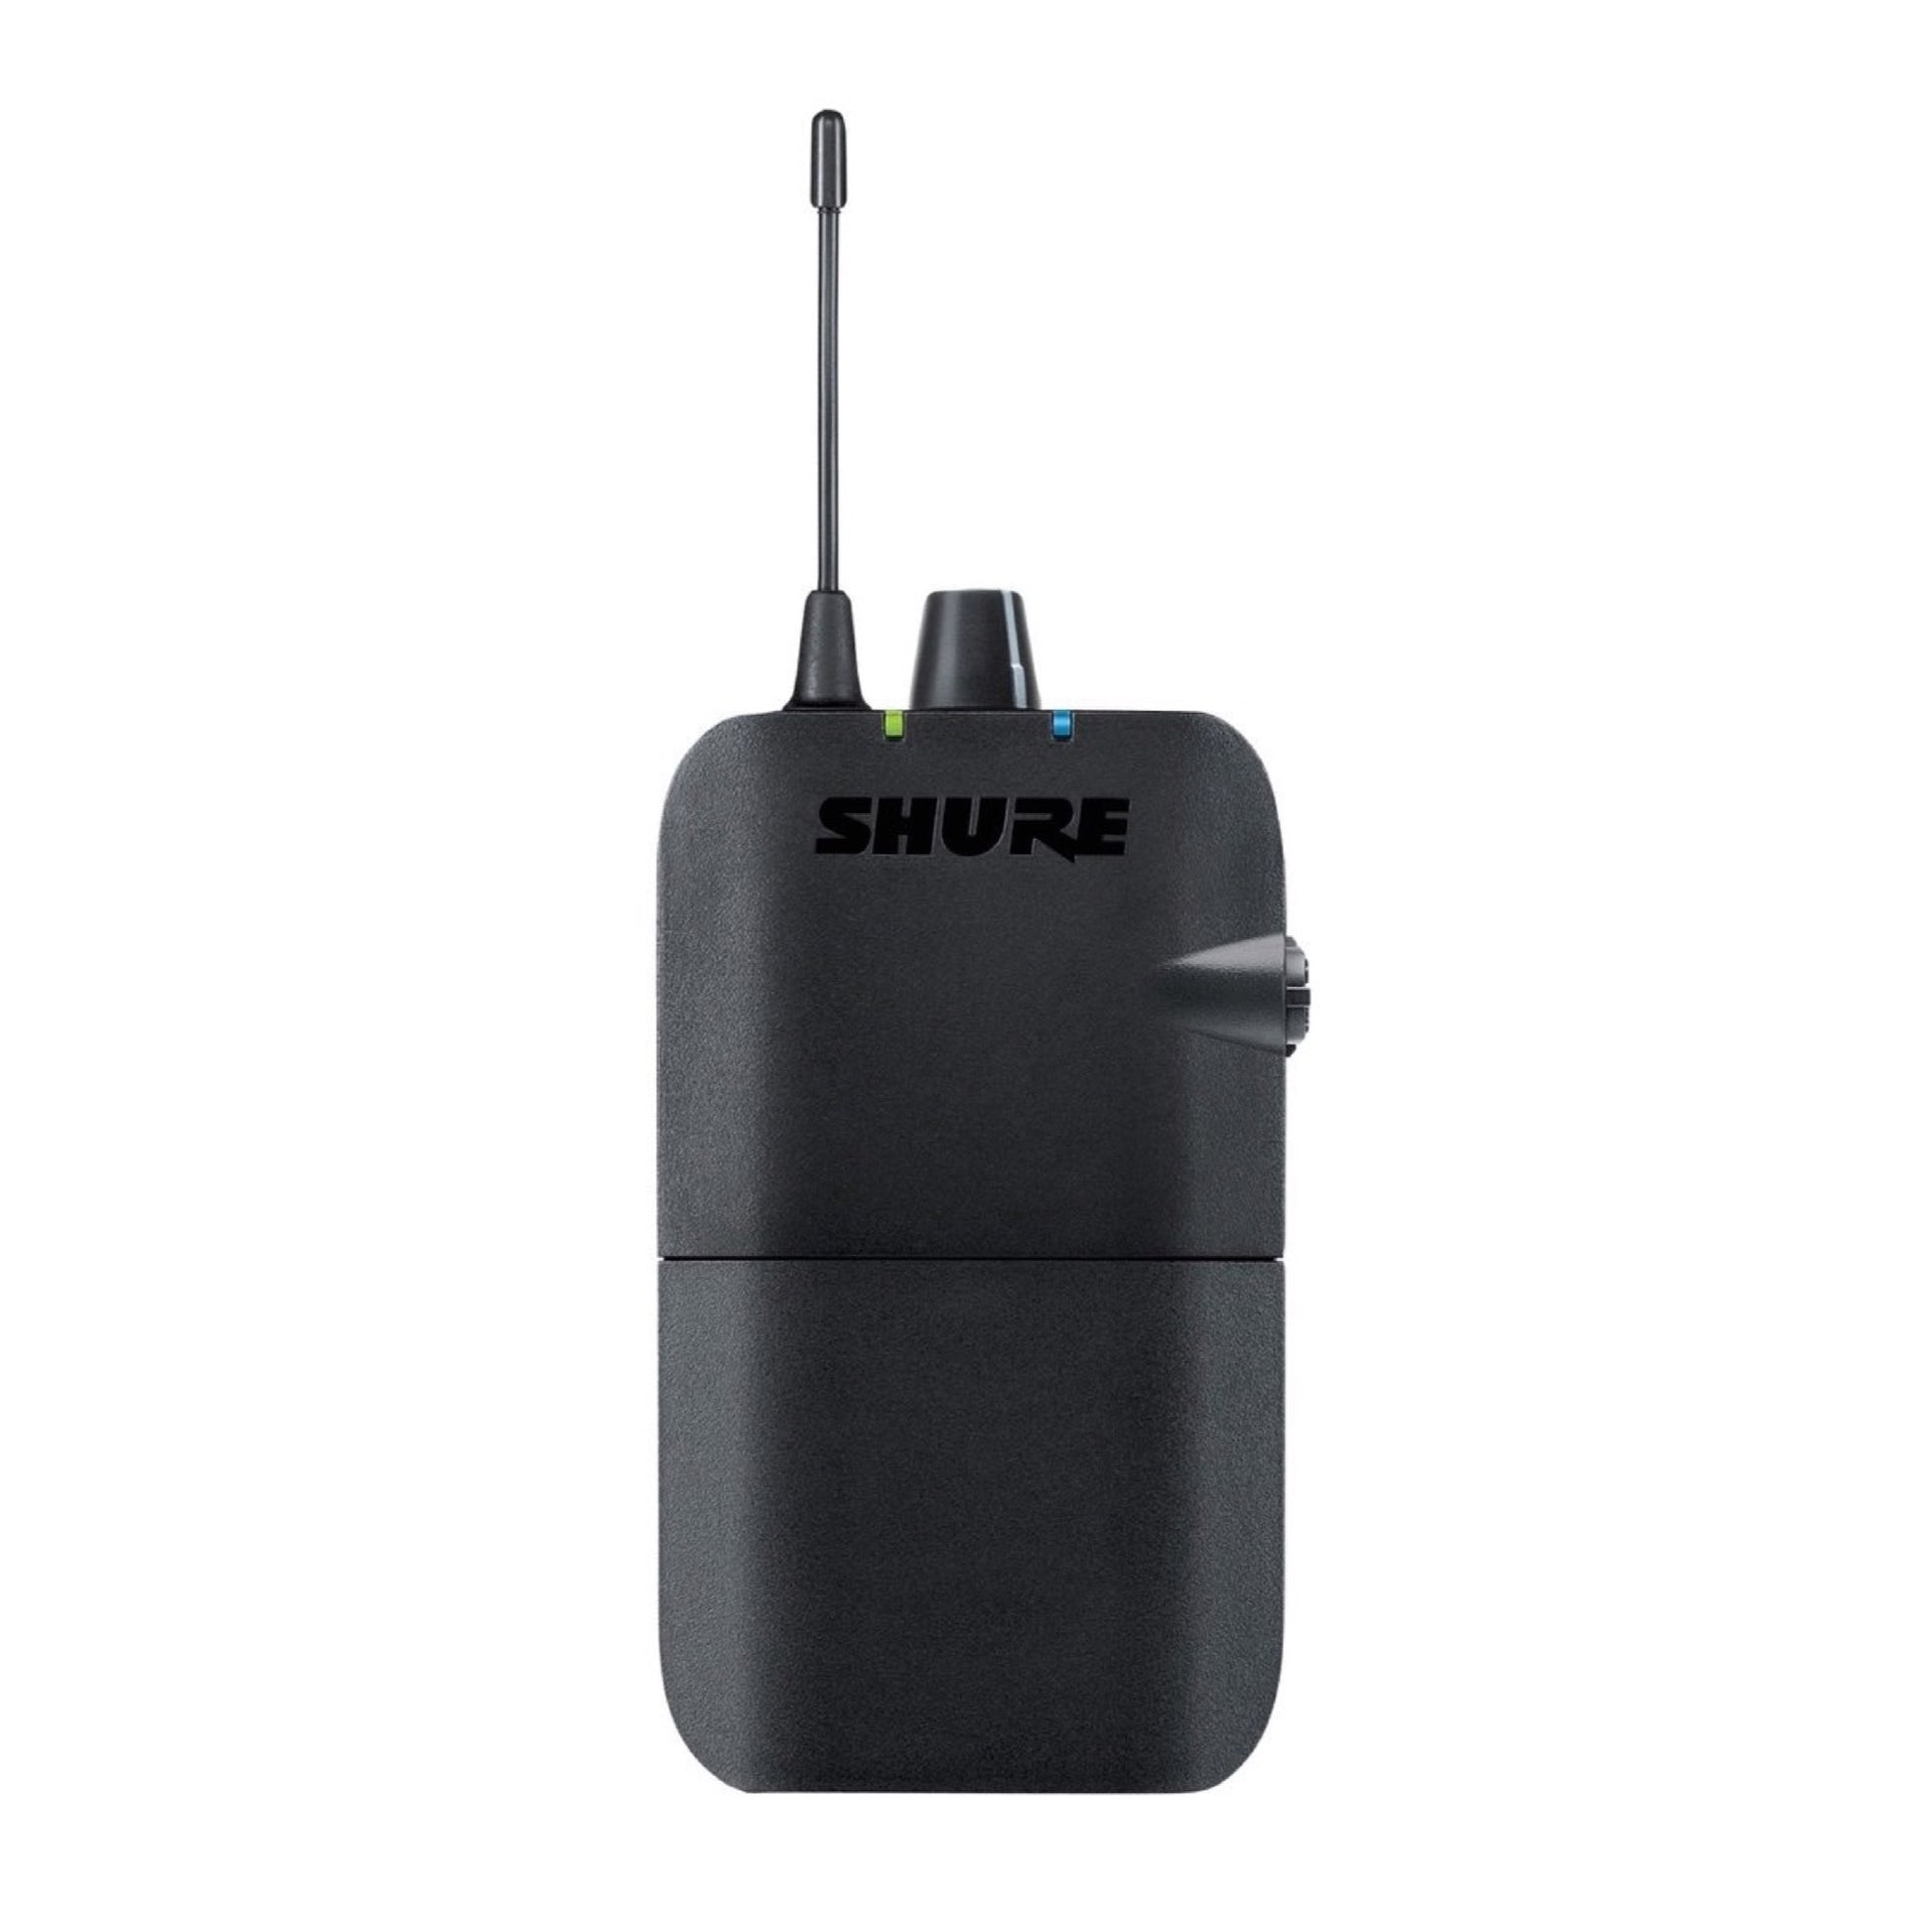 Shure P3R PSM300 Wireless In-Ear Monitor Bodypack, Band J13 (566.175 - 589.850 MHz)